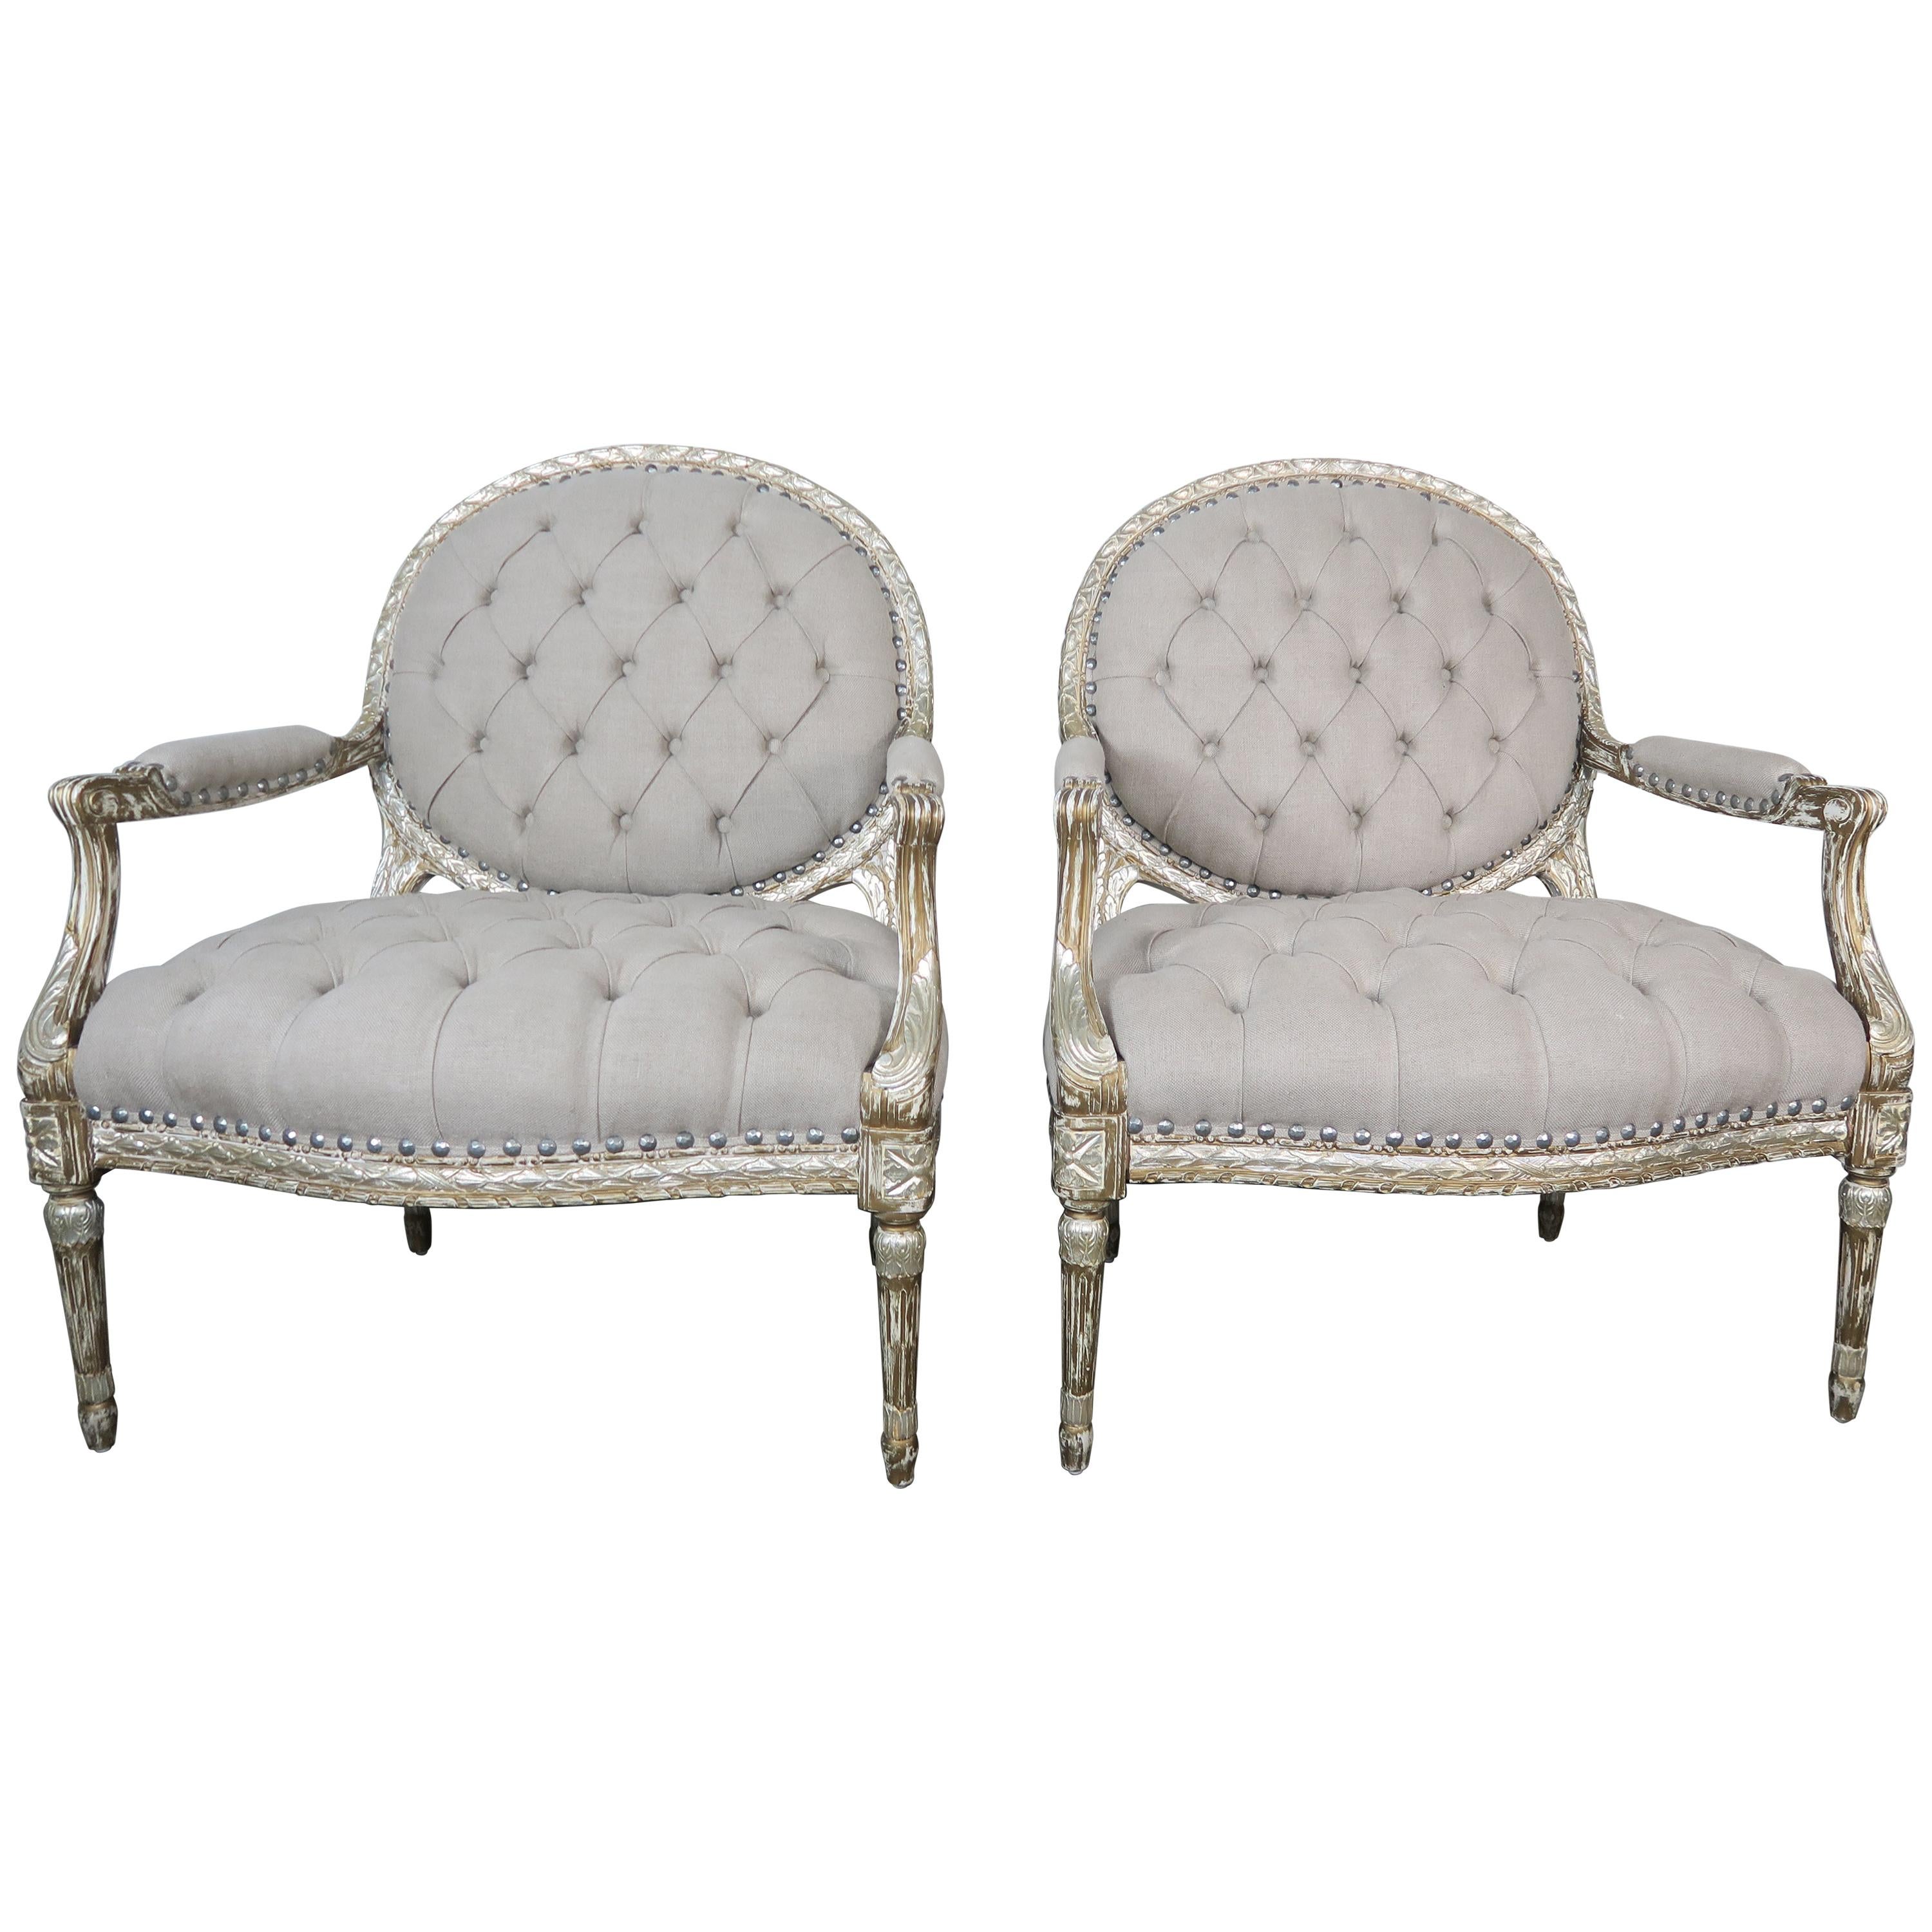 Pair of Silver Gilt Carved Neoclassical Style Armchairs